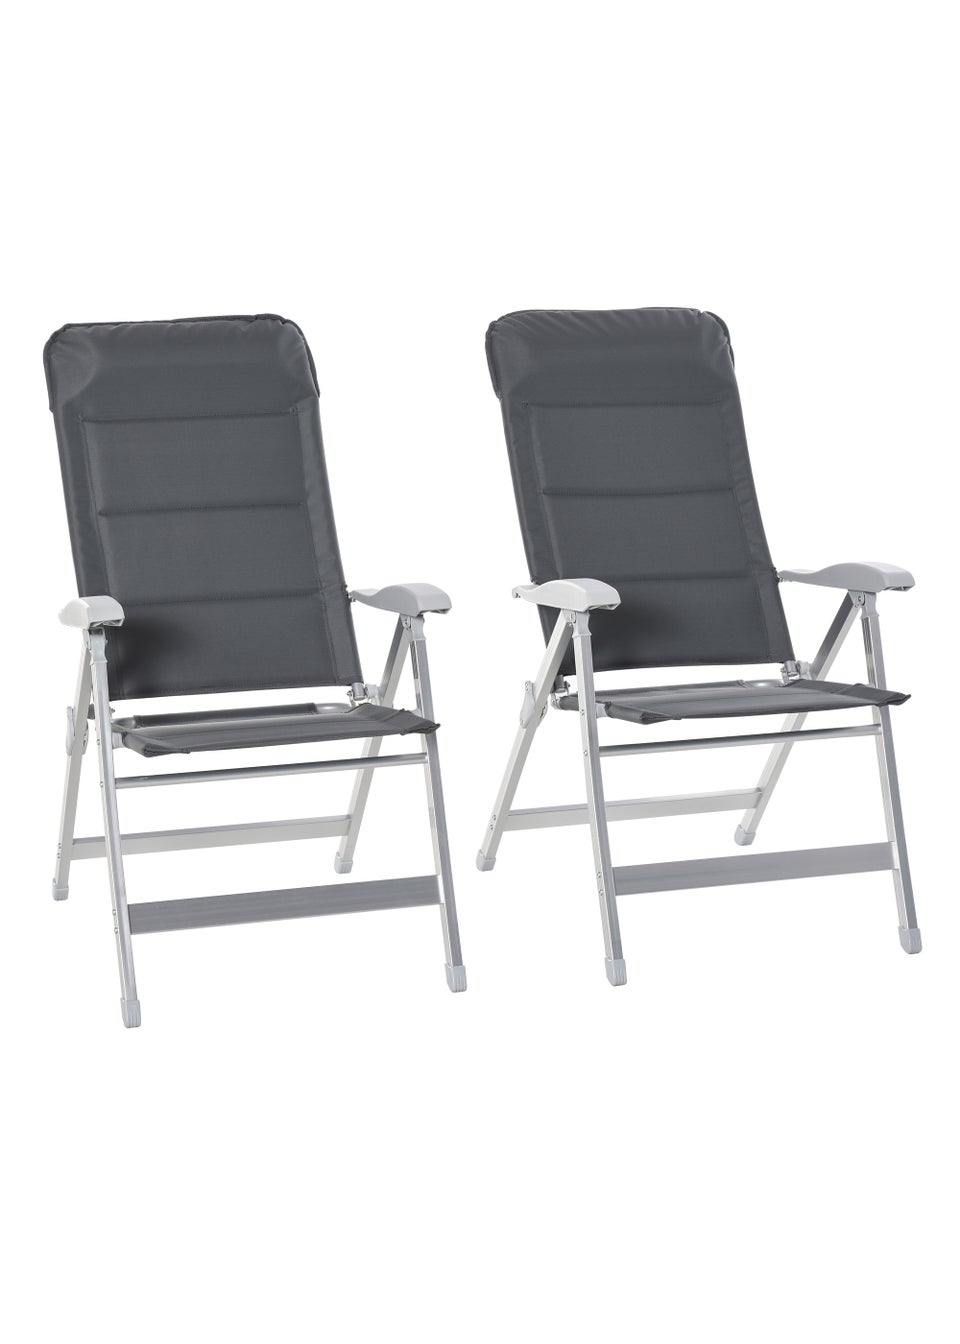 Outsunny 2 Piece Grey Padded Deck Chairs (115cm x 61.5cm x 75cm)